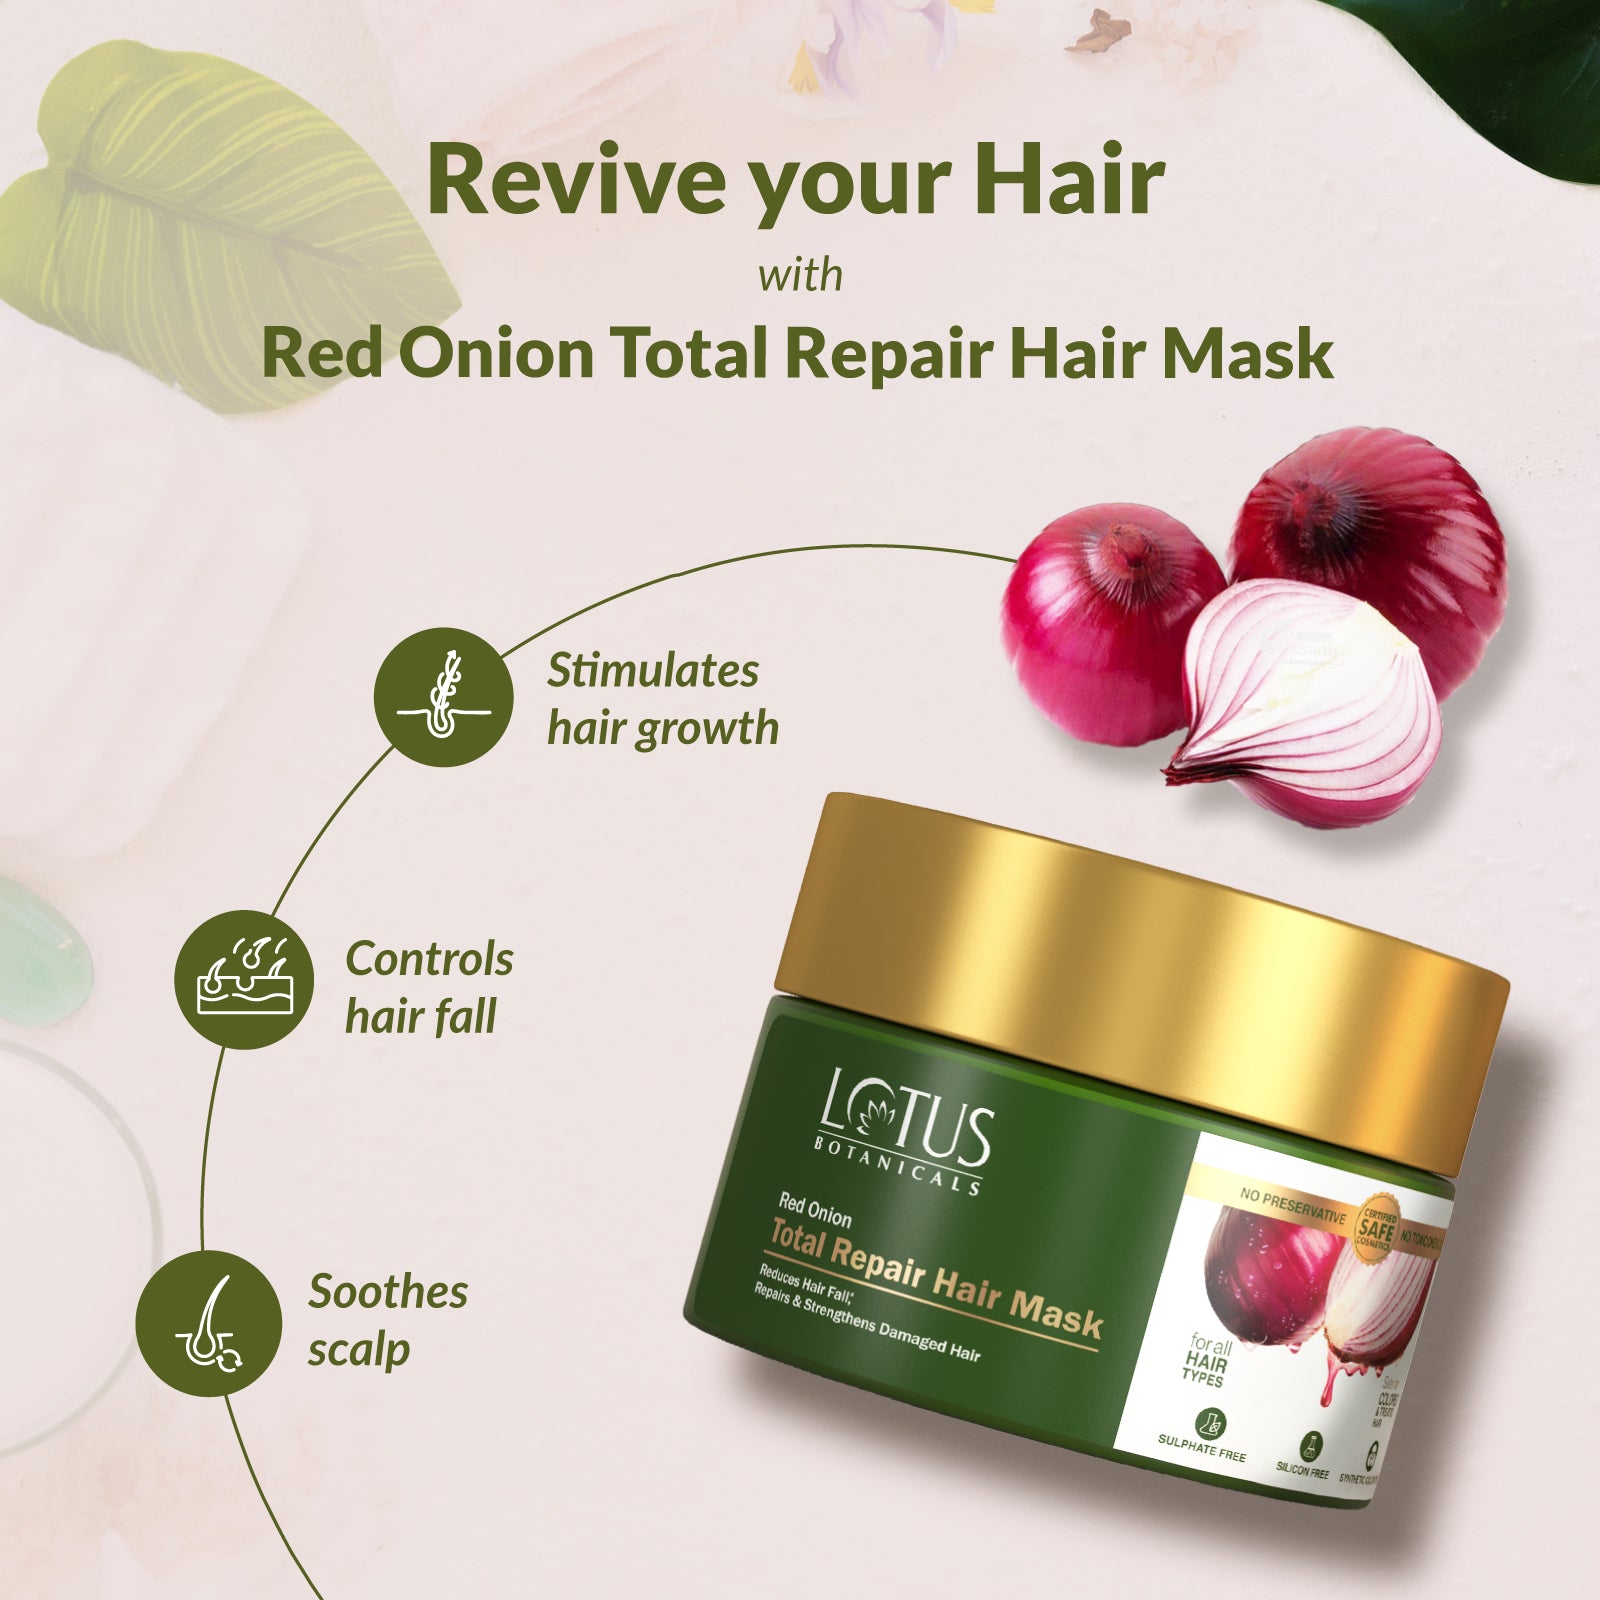 Red Onion Total Repair Hair Mask - Deep Conditioning Treatment for Damaged Hair